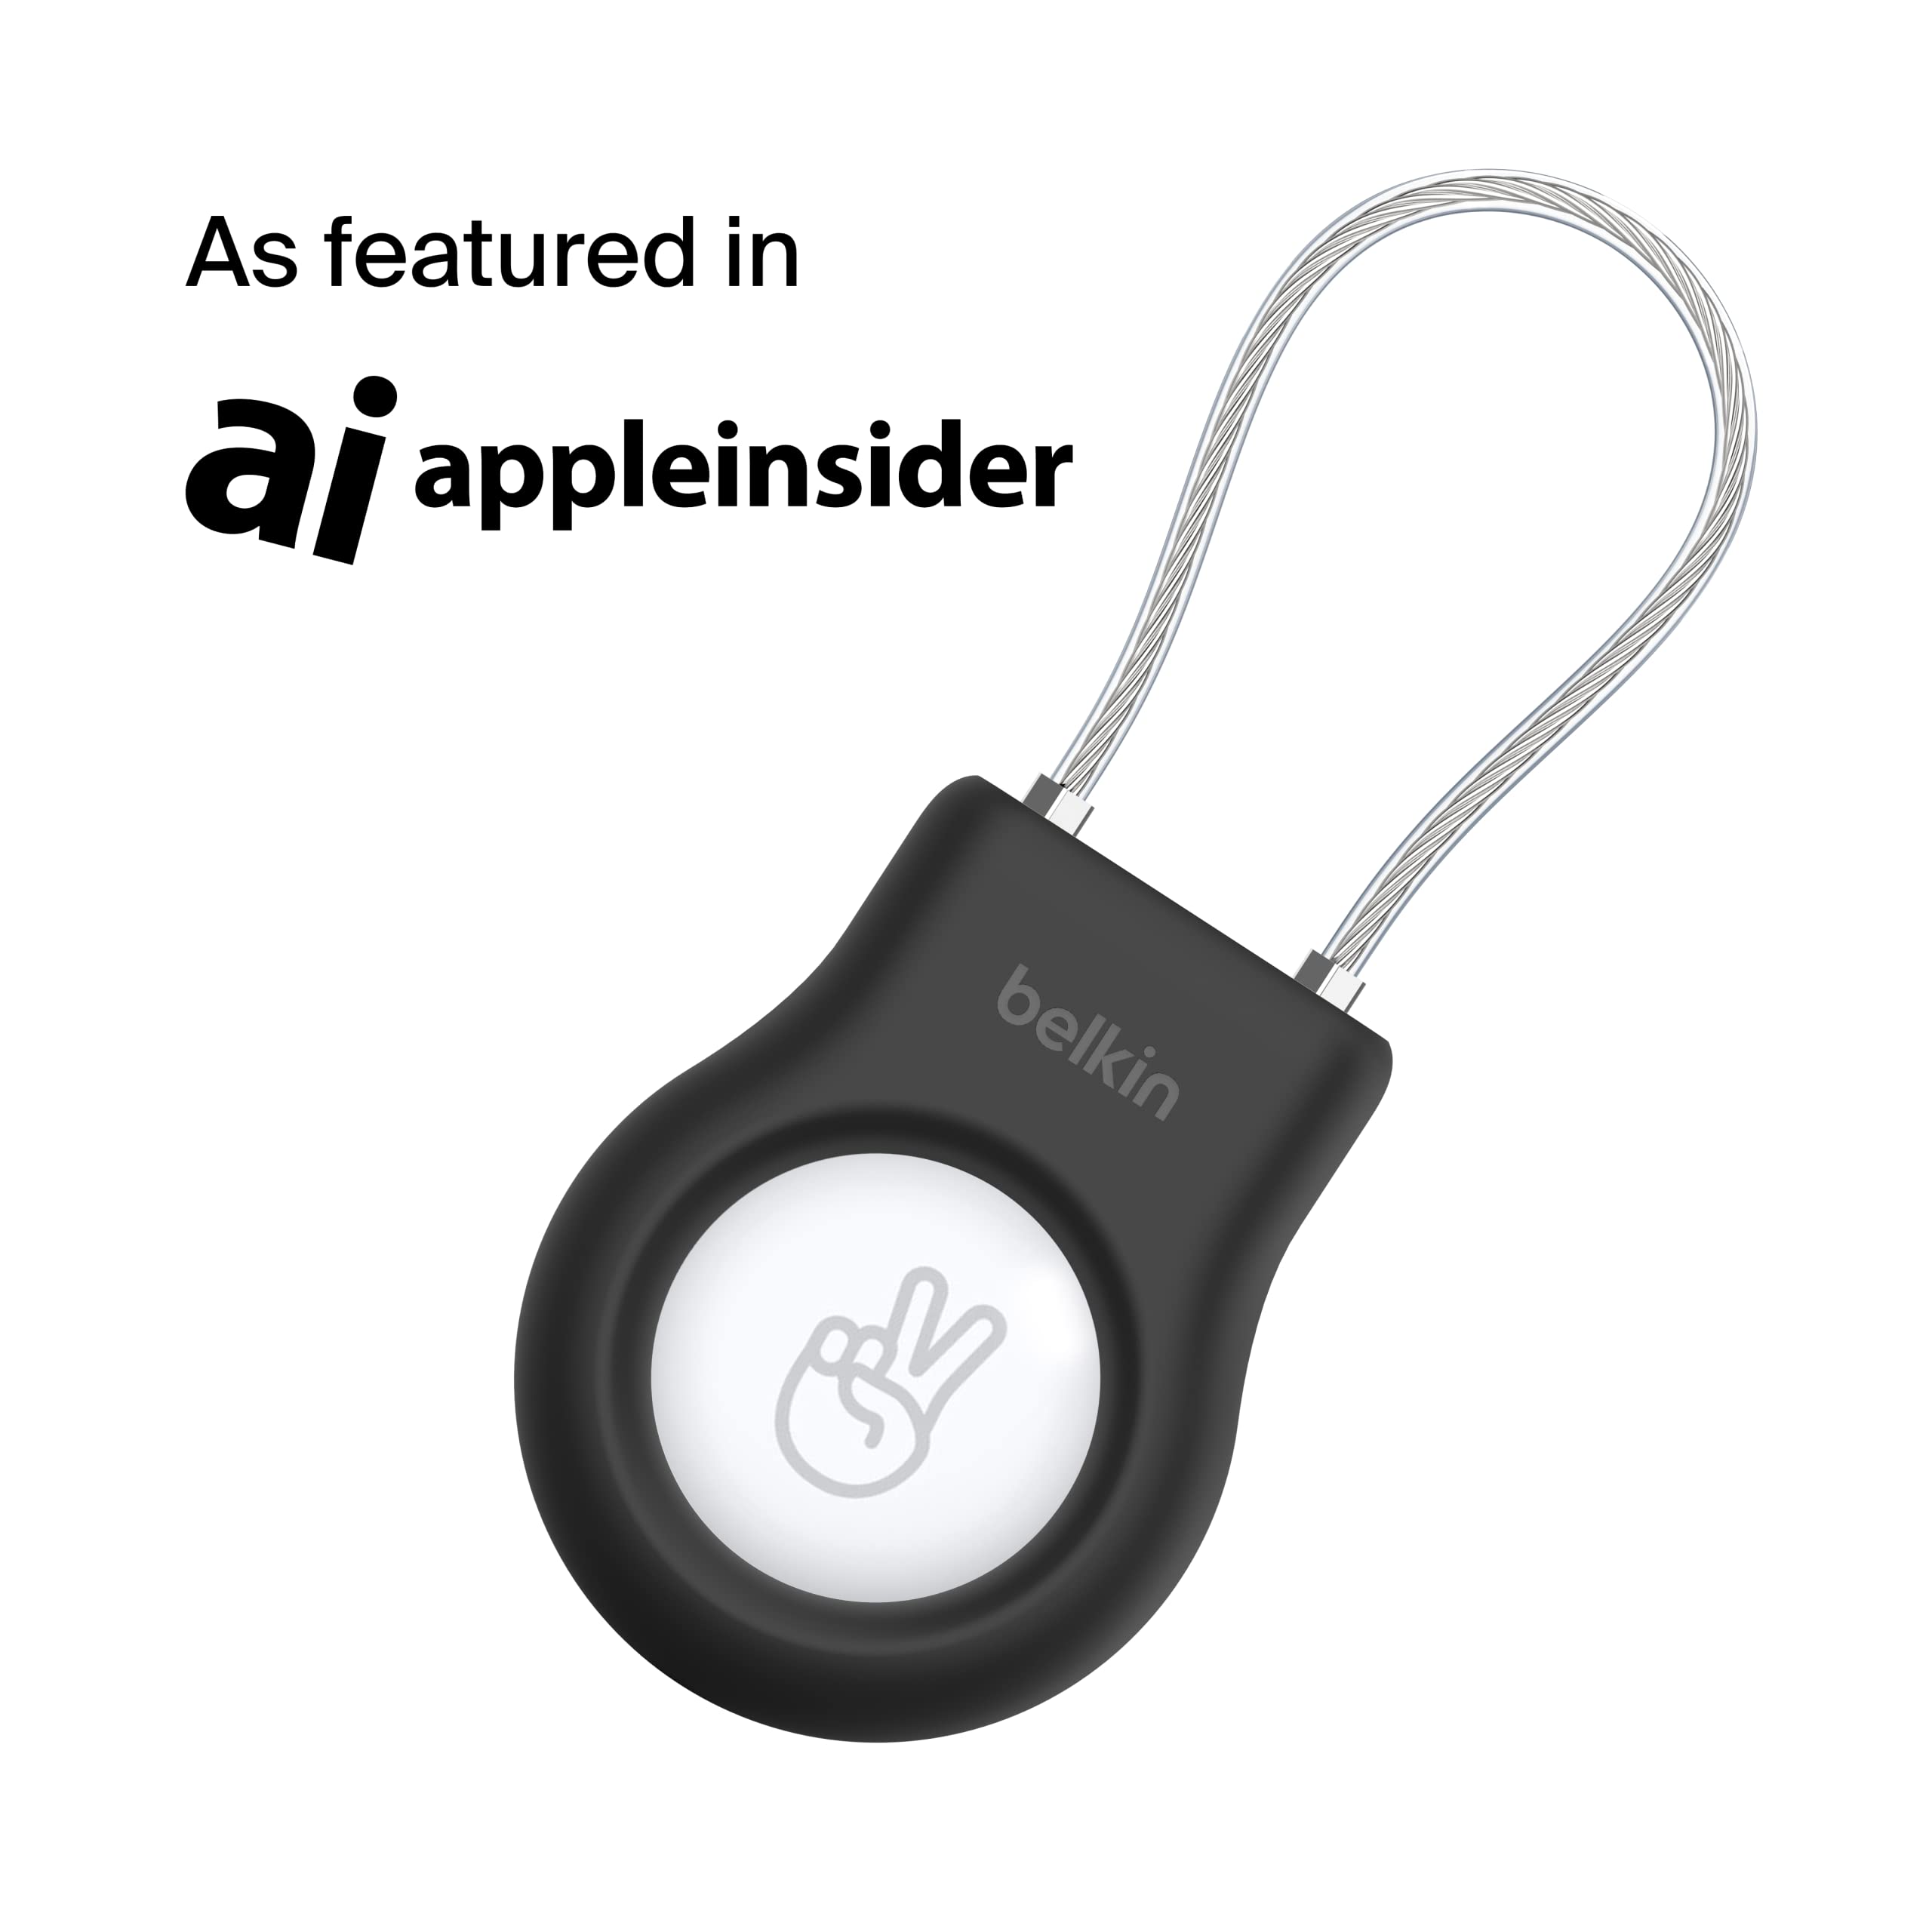 Belkin Apple AirTag Secure Holder With Wire Cable - Lock & Protect Air Tags In Durable Scratch Resistant Case - Protective AirTag Keychain Accessory For Keys, Luggage & More - Black